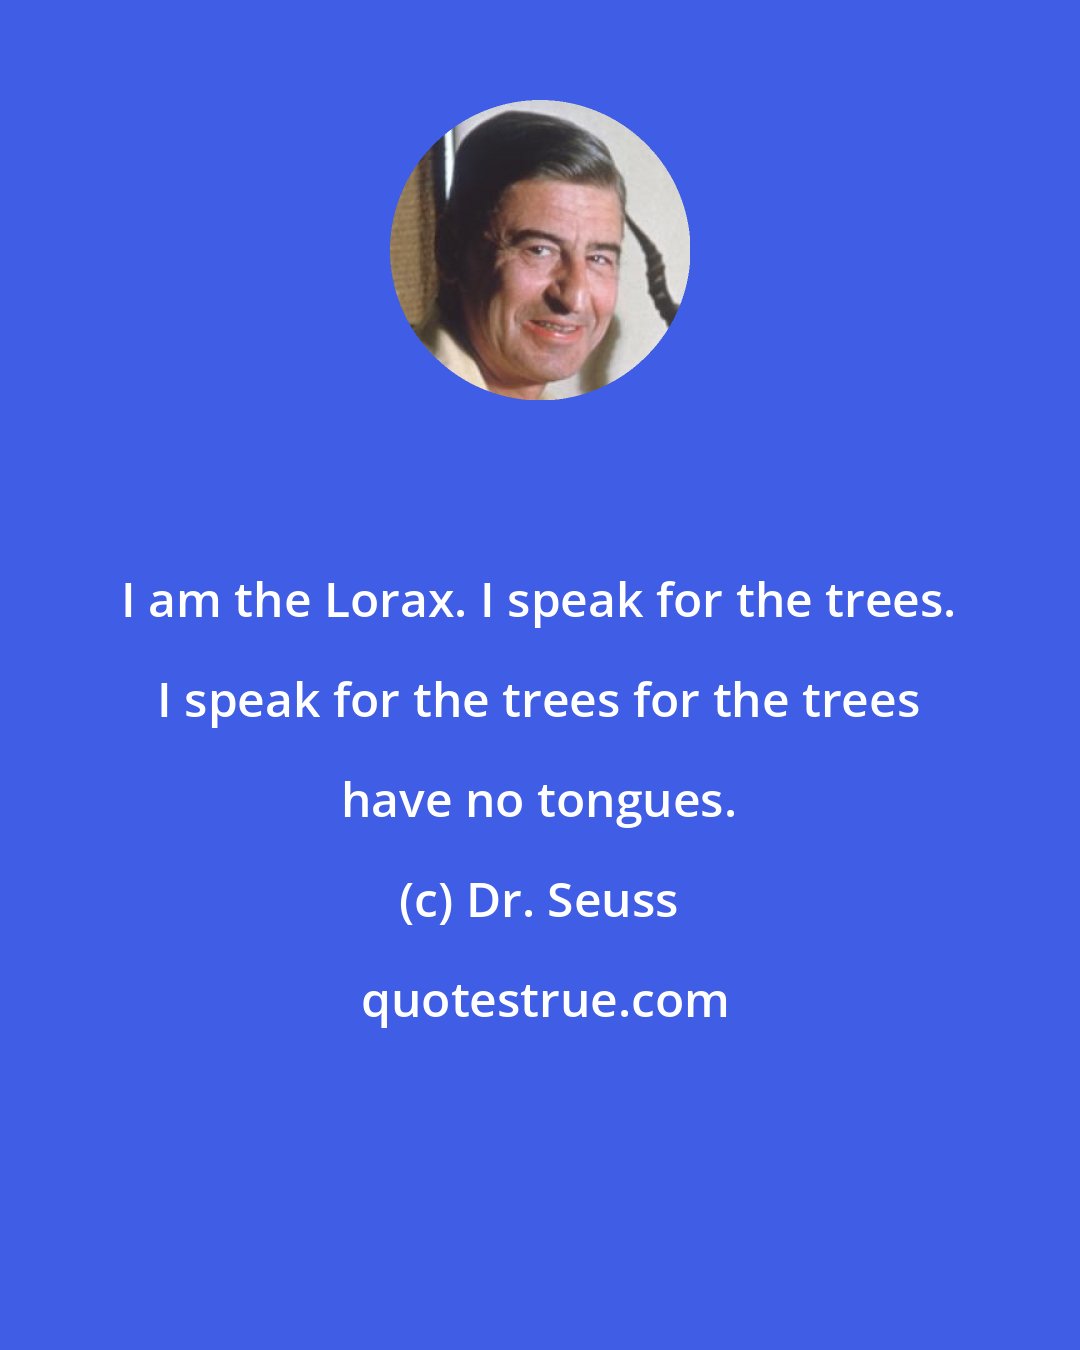 Dr. Seuss: I am the Lorax. I speak for the trees. I speak for the trees for the trees have no tongues.